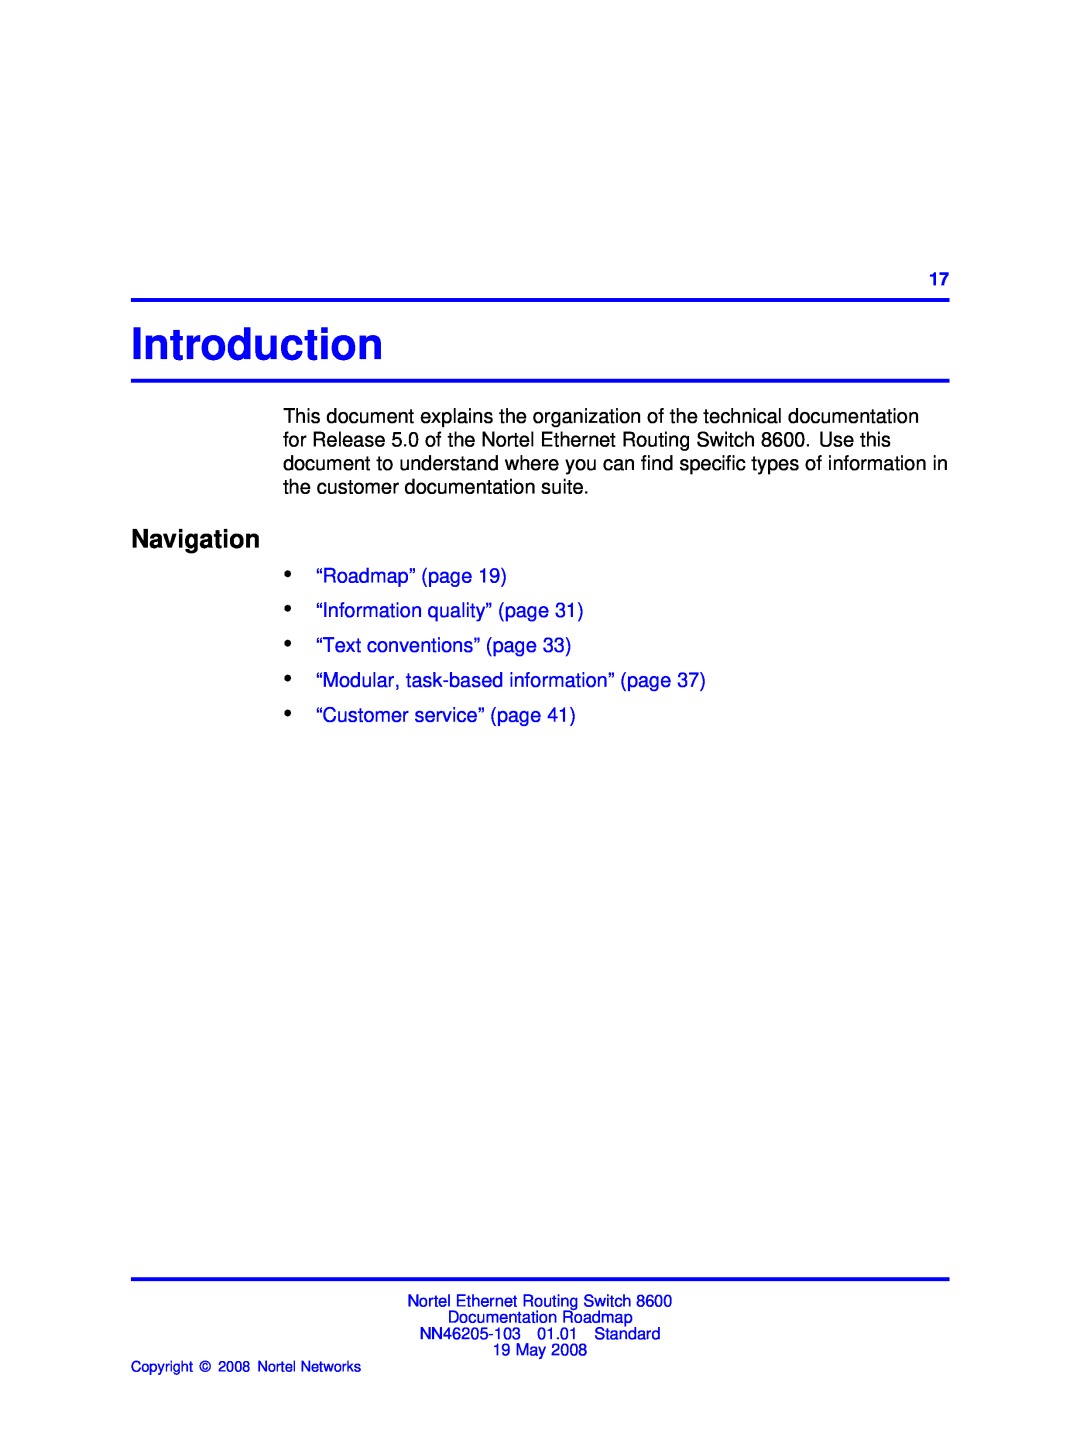 Nortel Networks 8600 manual Introduction, Navigation, “Roadmap” page “Information quality” page “Text conventions” page 